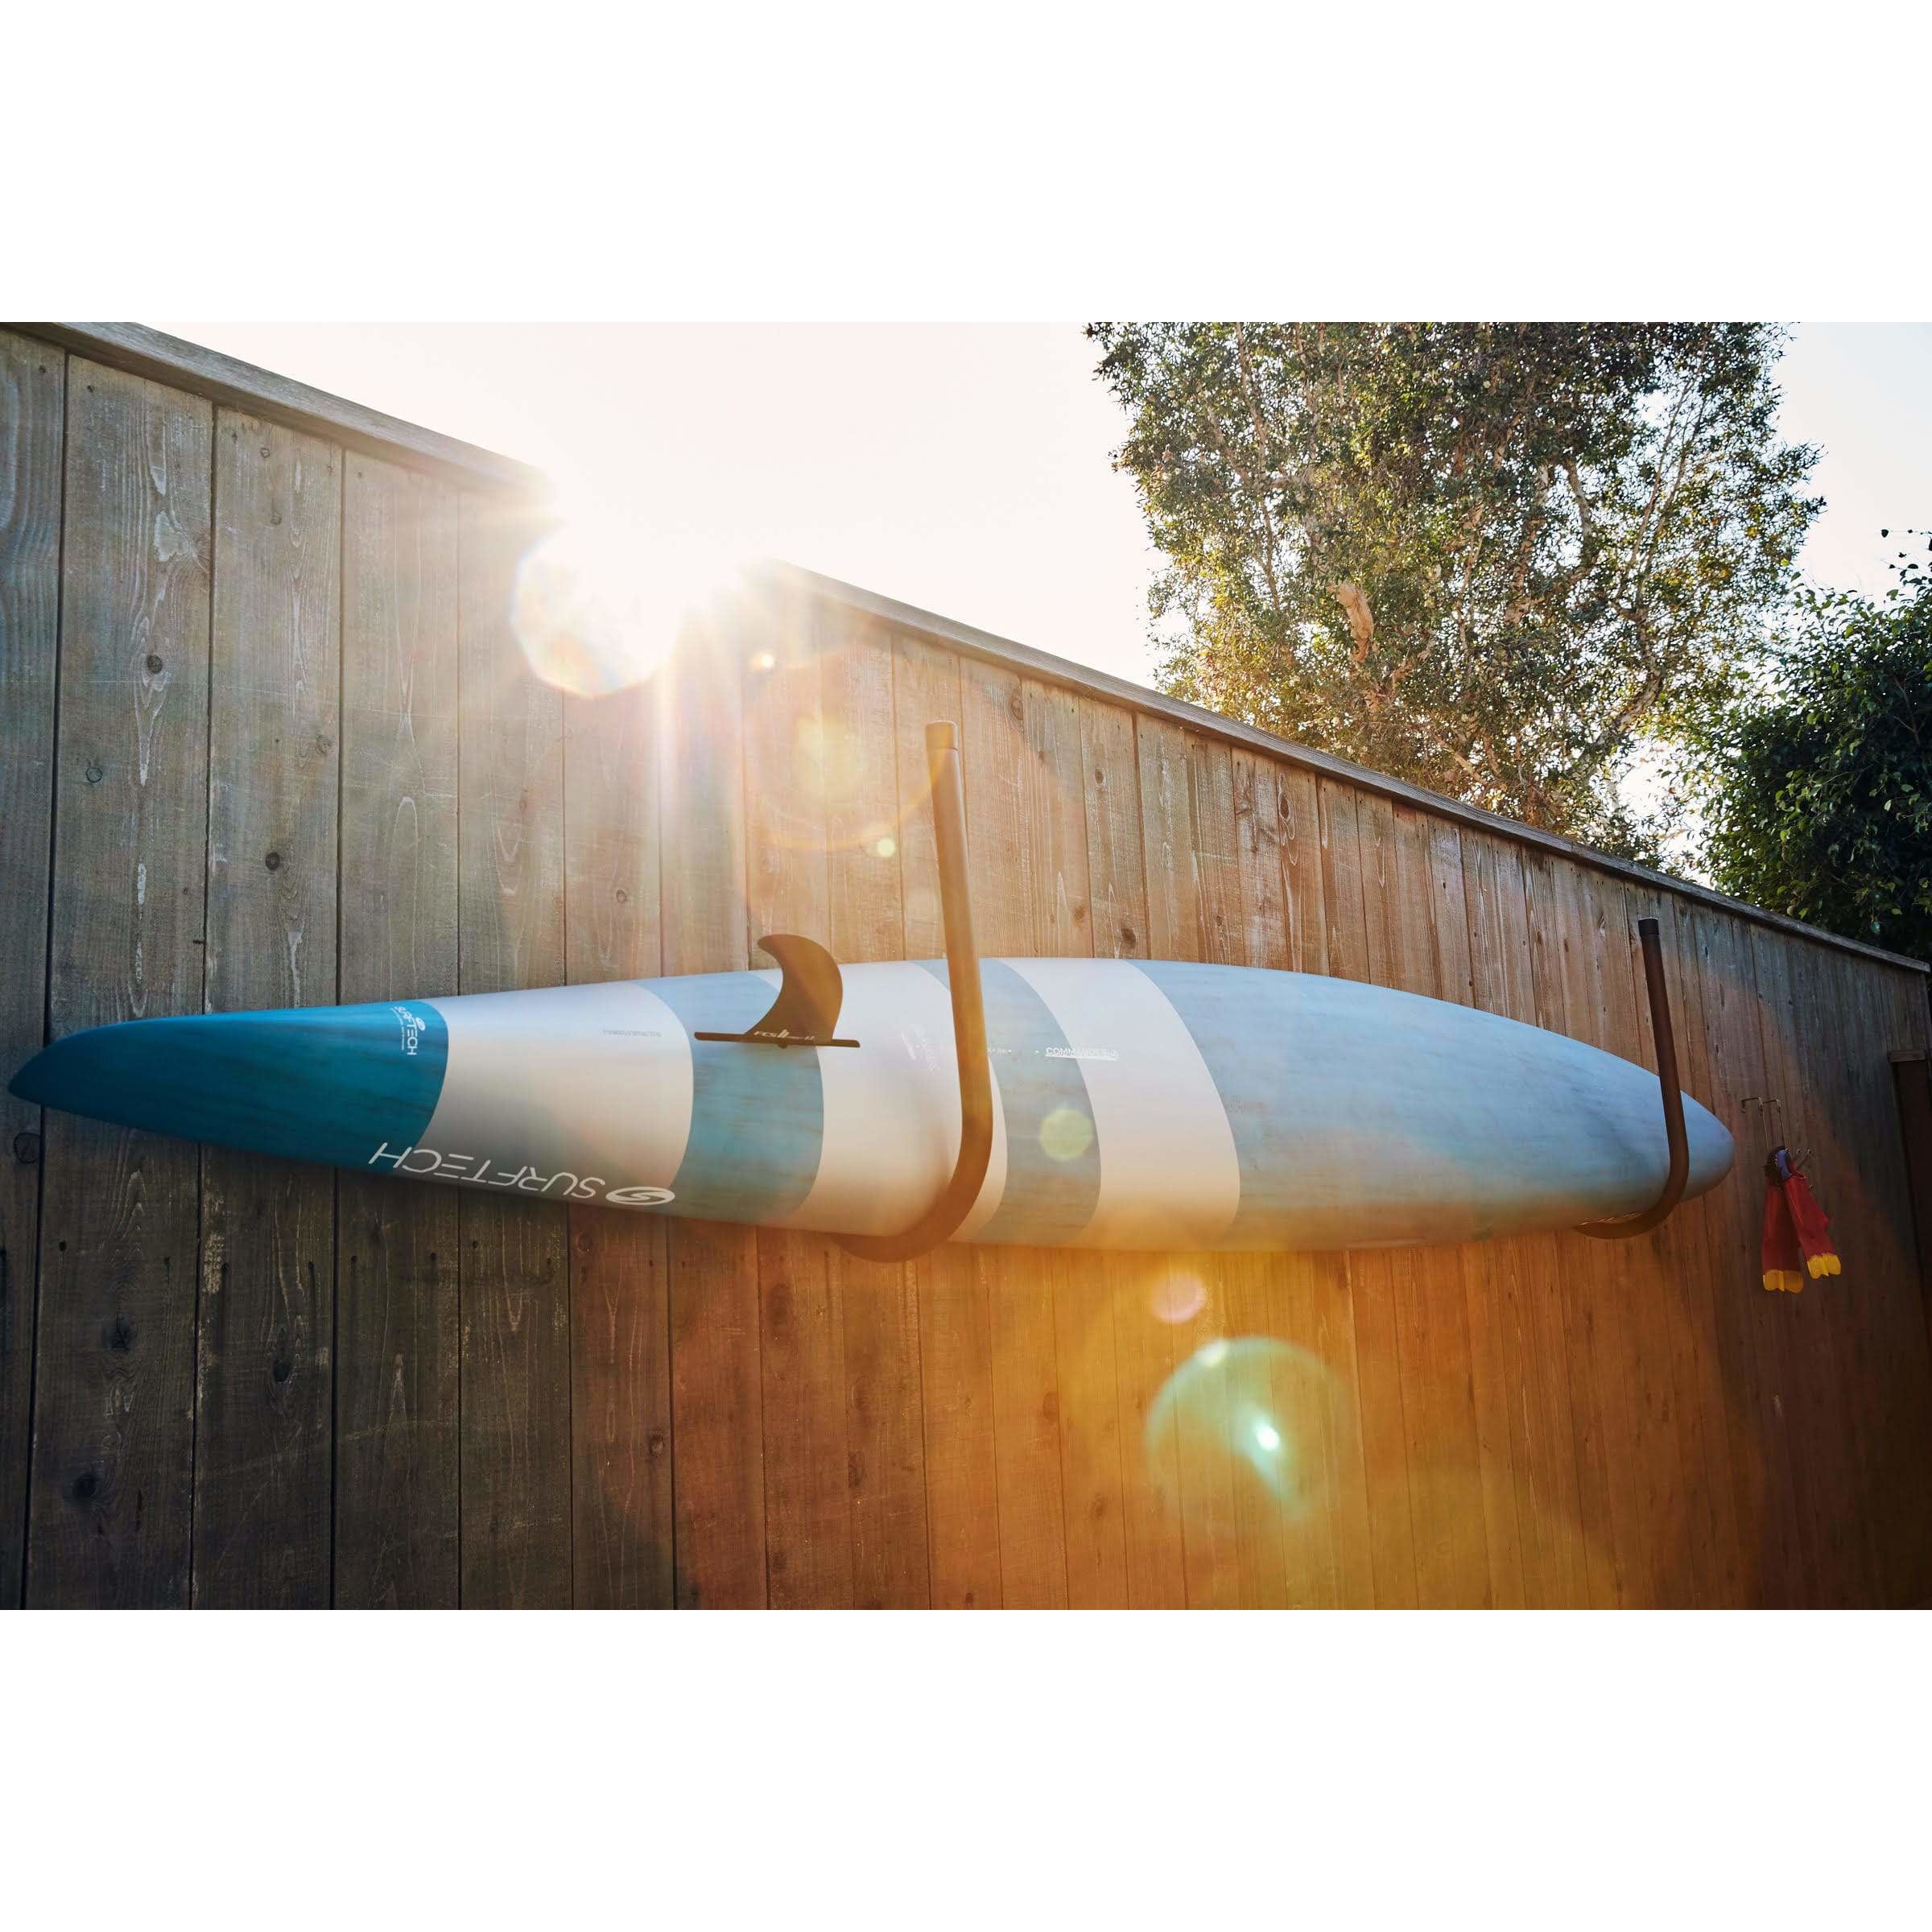 paddleboard wall mount for garage storage